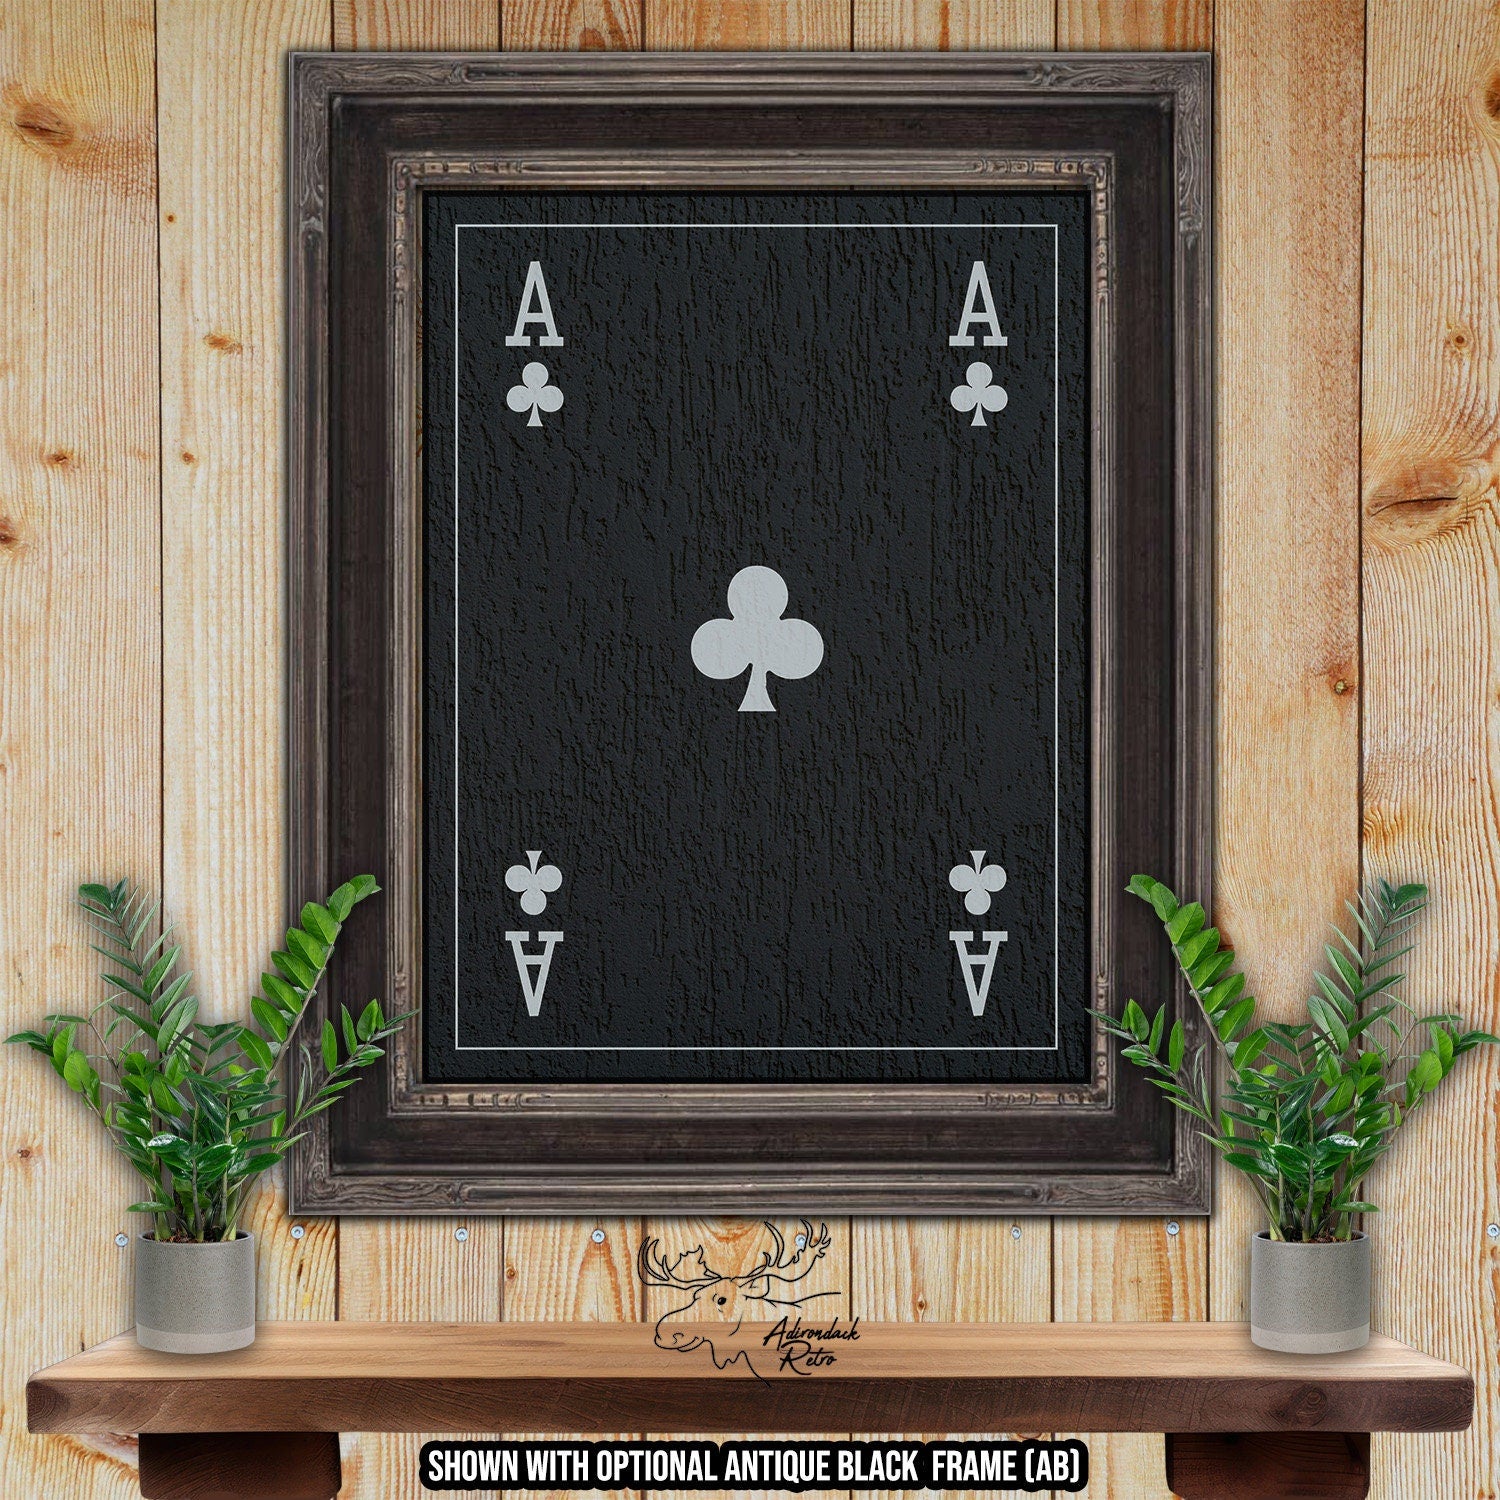 Ace of Clubs Playing Card - Black & Silver Fine Art Print at Adirondack Retro